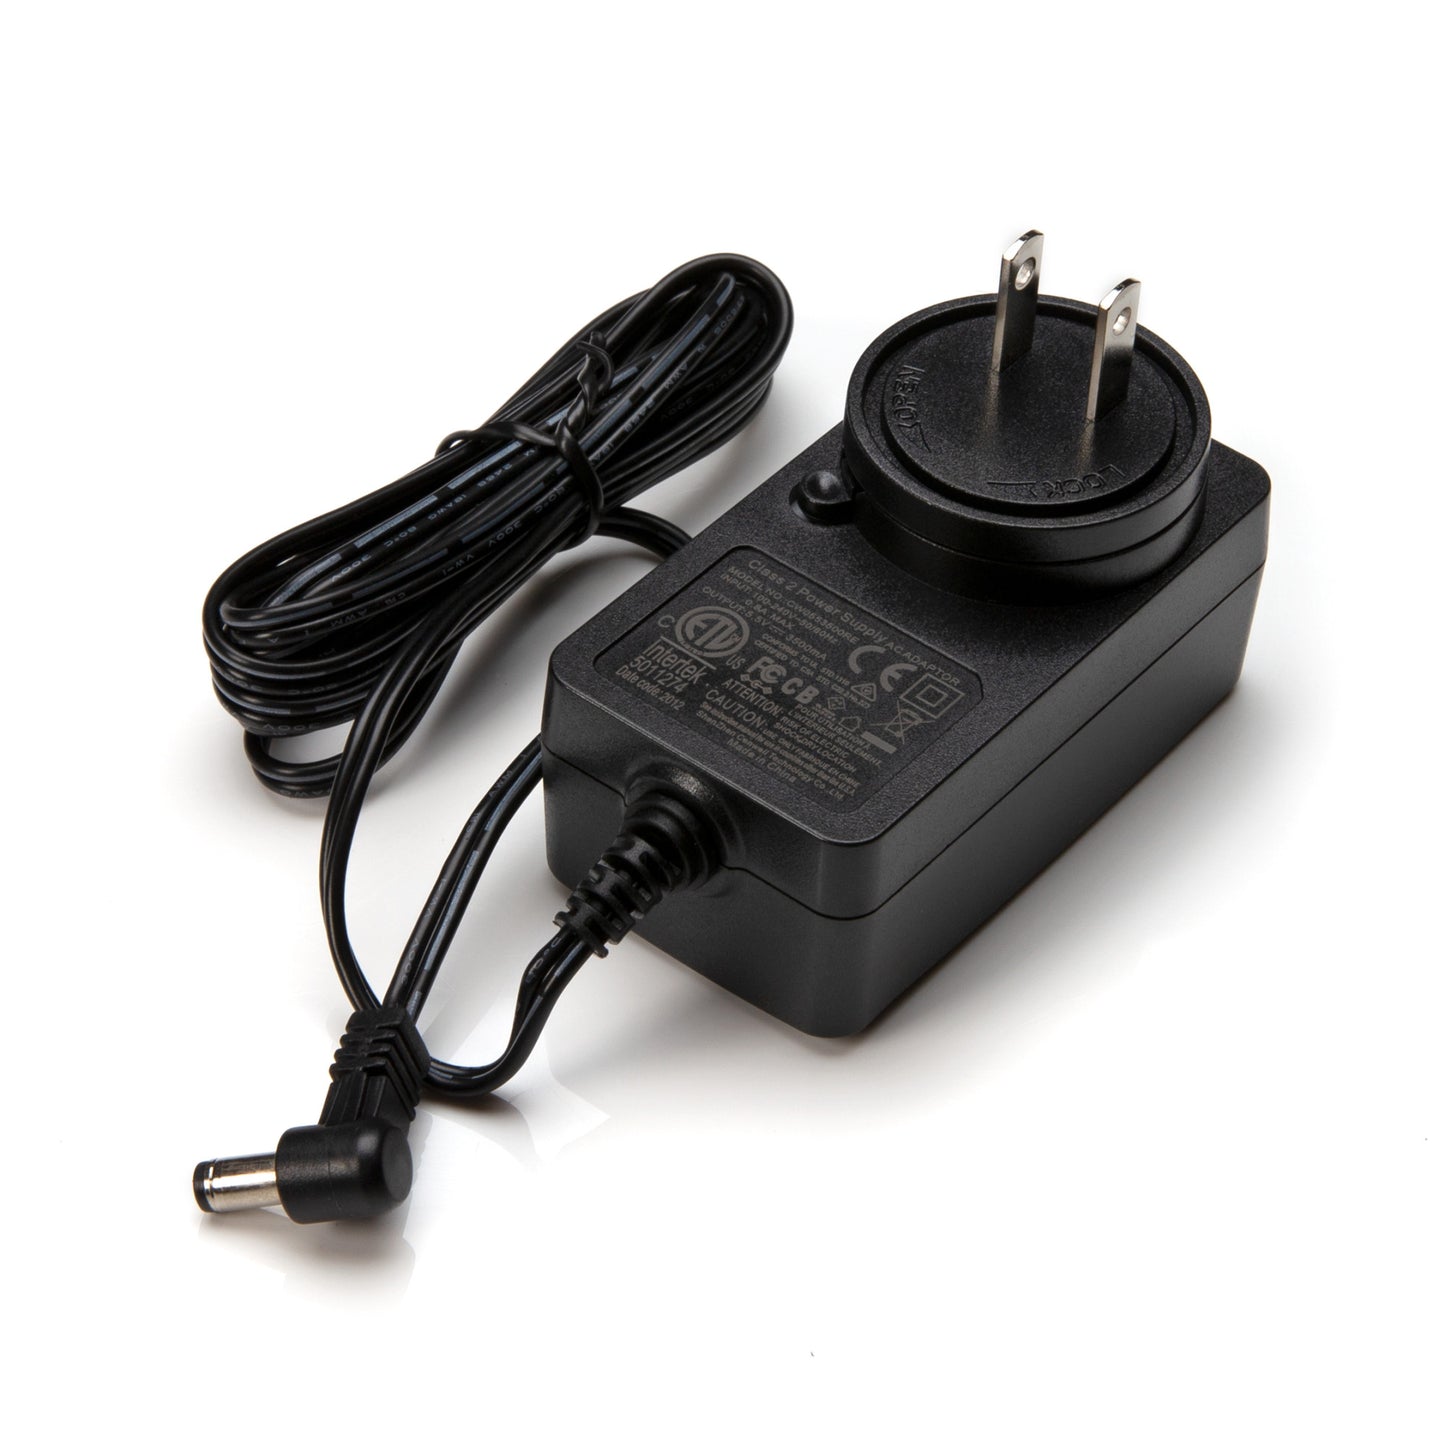 Replacement Wall Charger for Wireless ChassisEAR 2